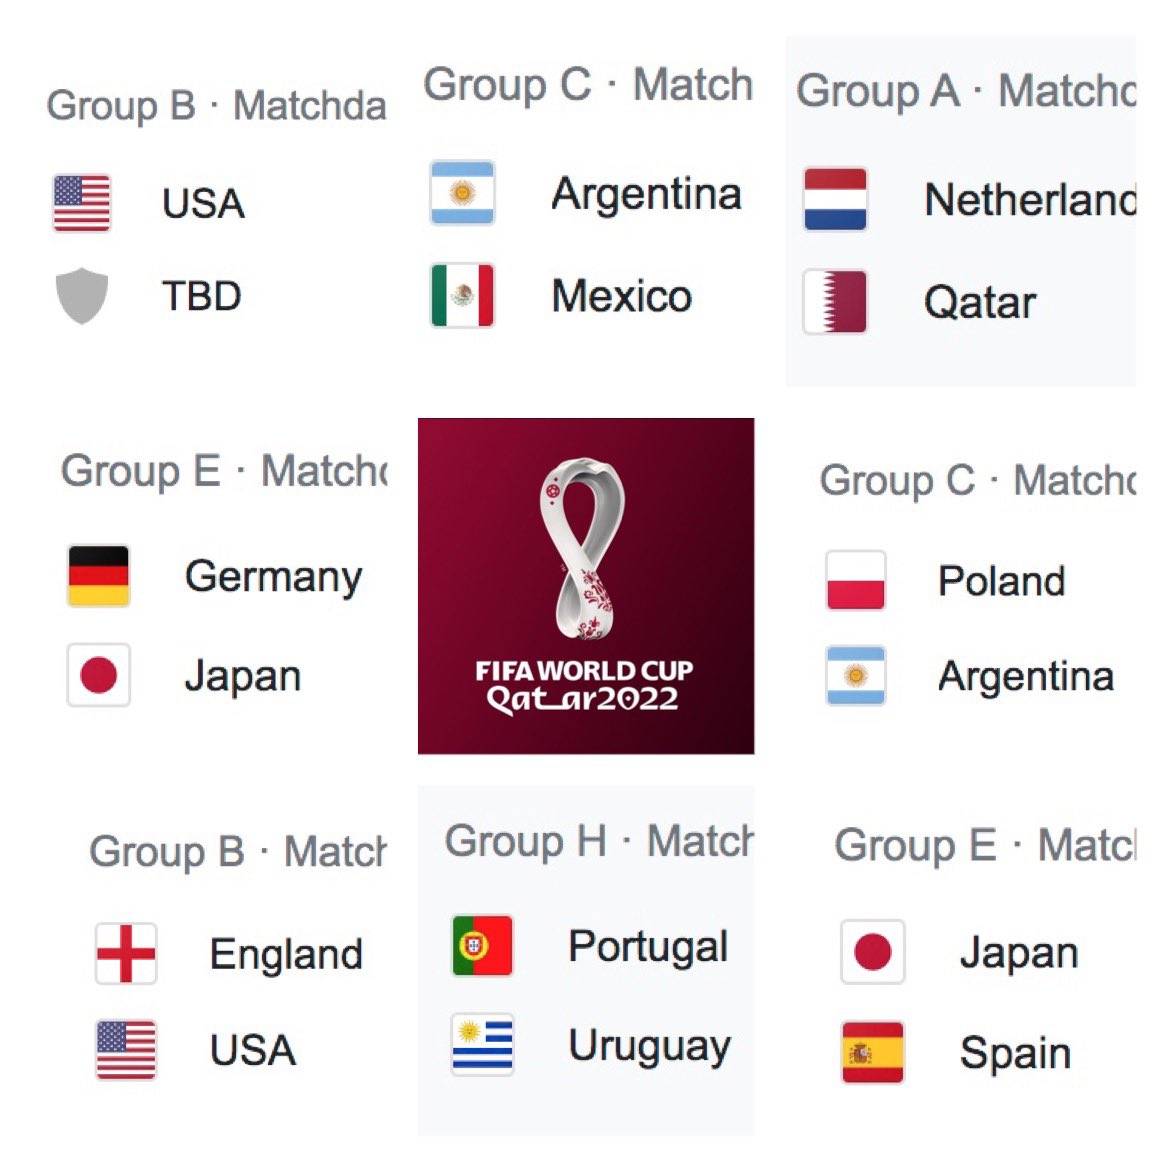 Although I didn’t get opener or final… I hit the motherload of group stage tickets for World Cup! Can’t wait for #WorldCup2022 #SeeYouInQatar #Qatar2022